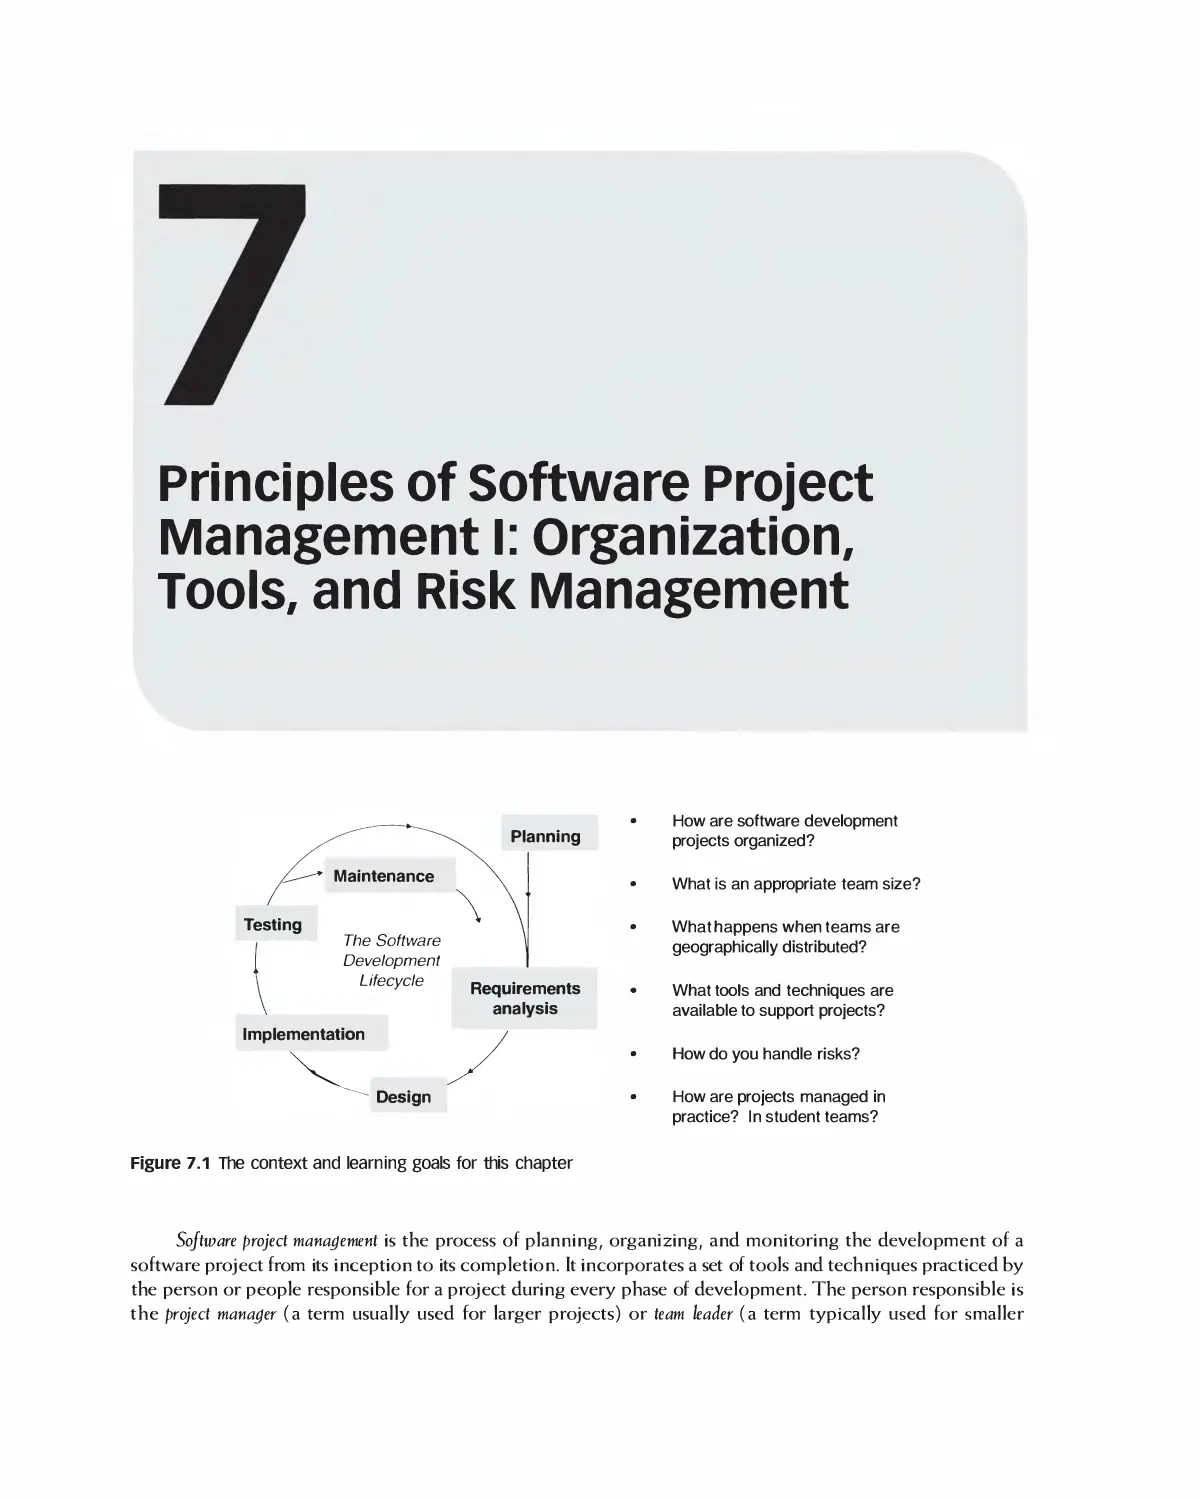 PART III: Project Management